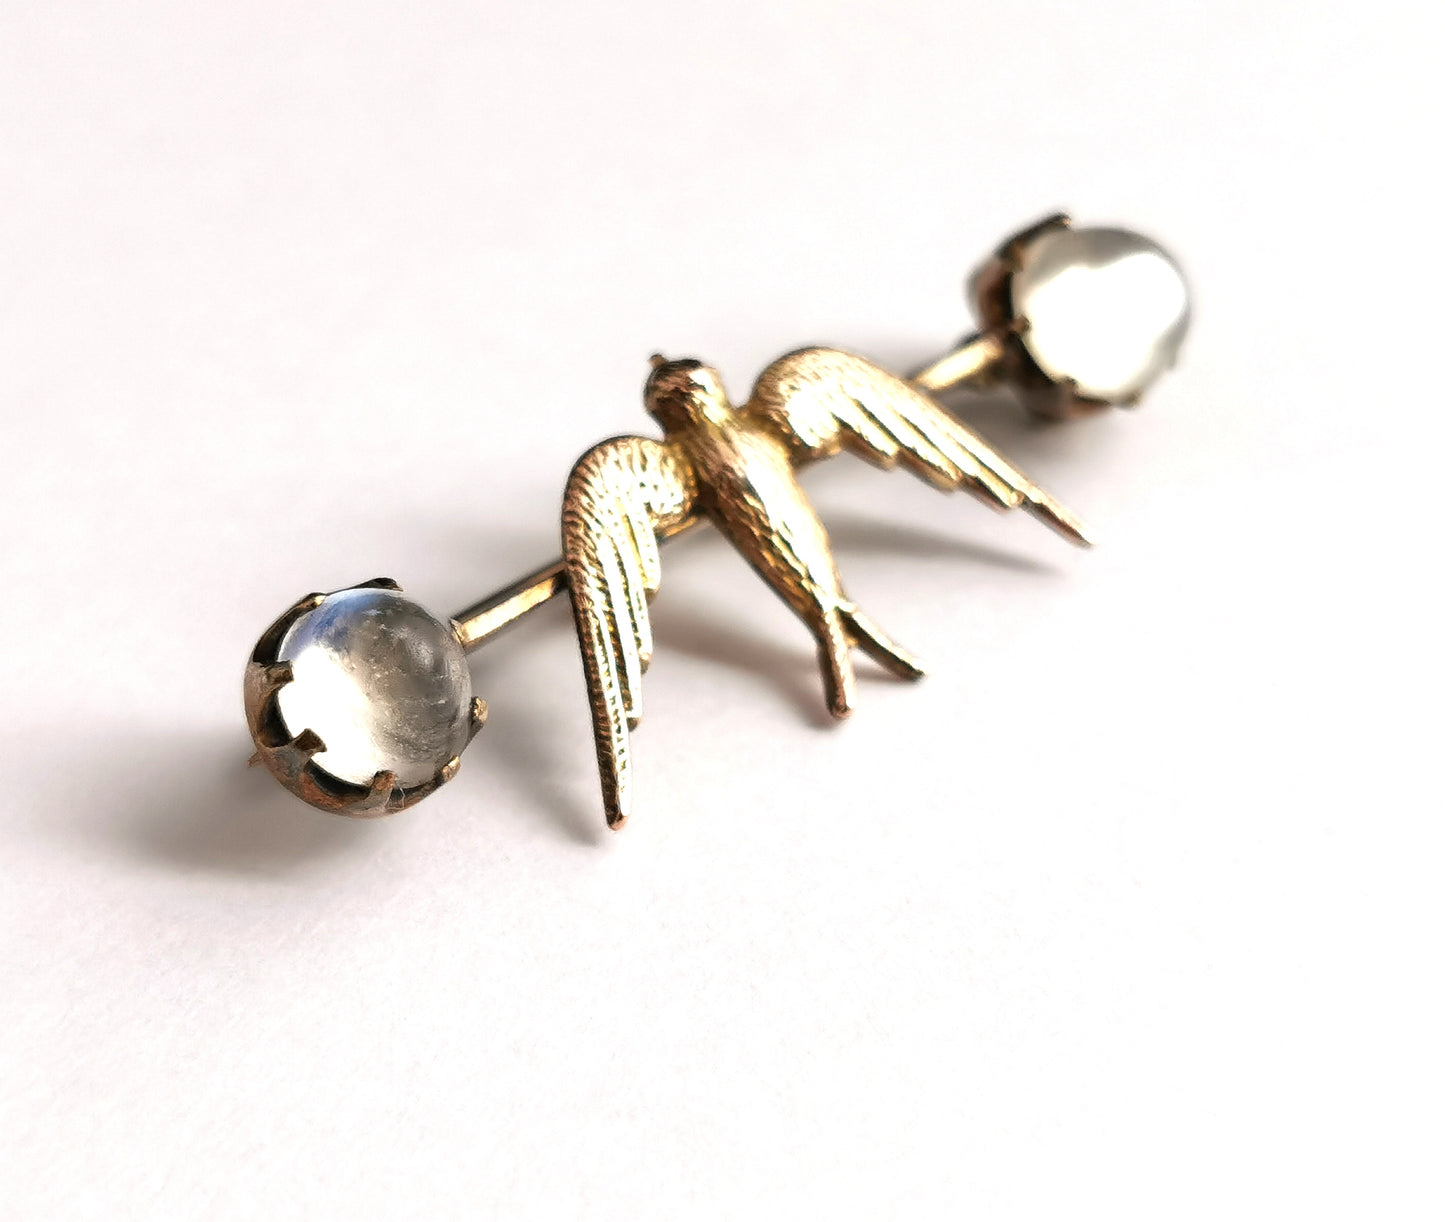 Antique Moonstone Swallow brooch, 12ct gold, Edwardian pin